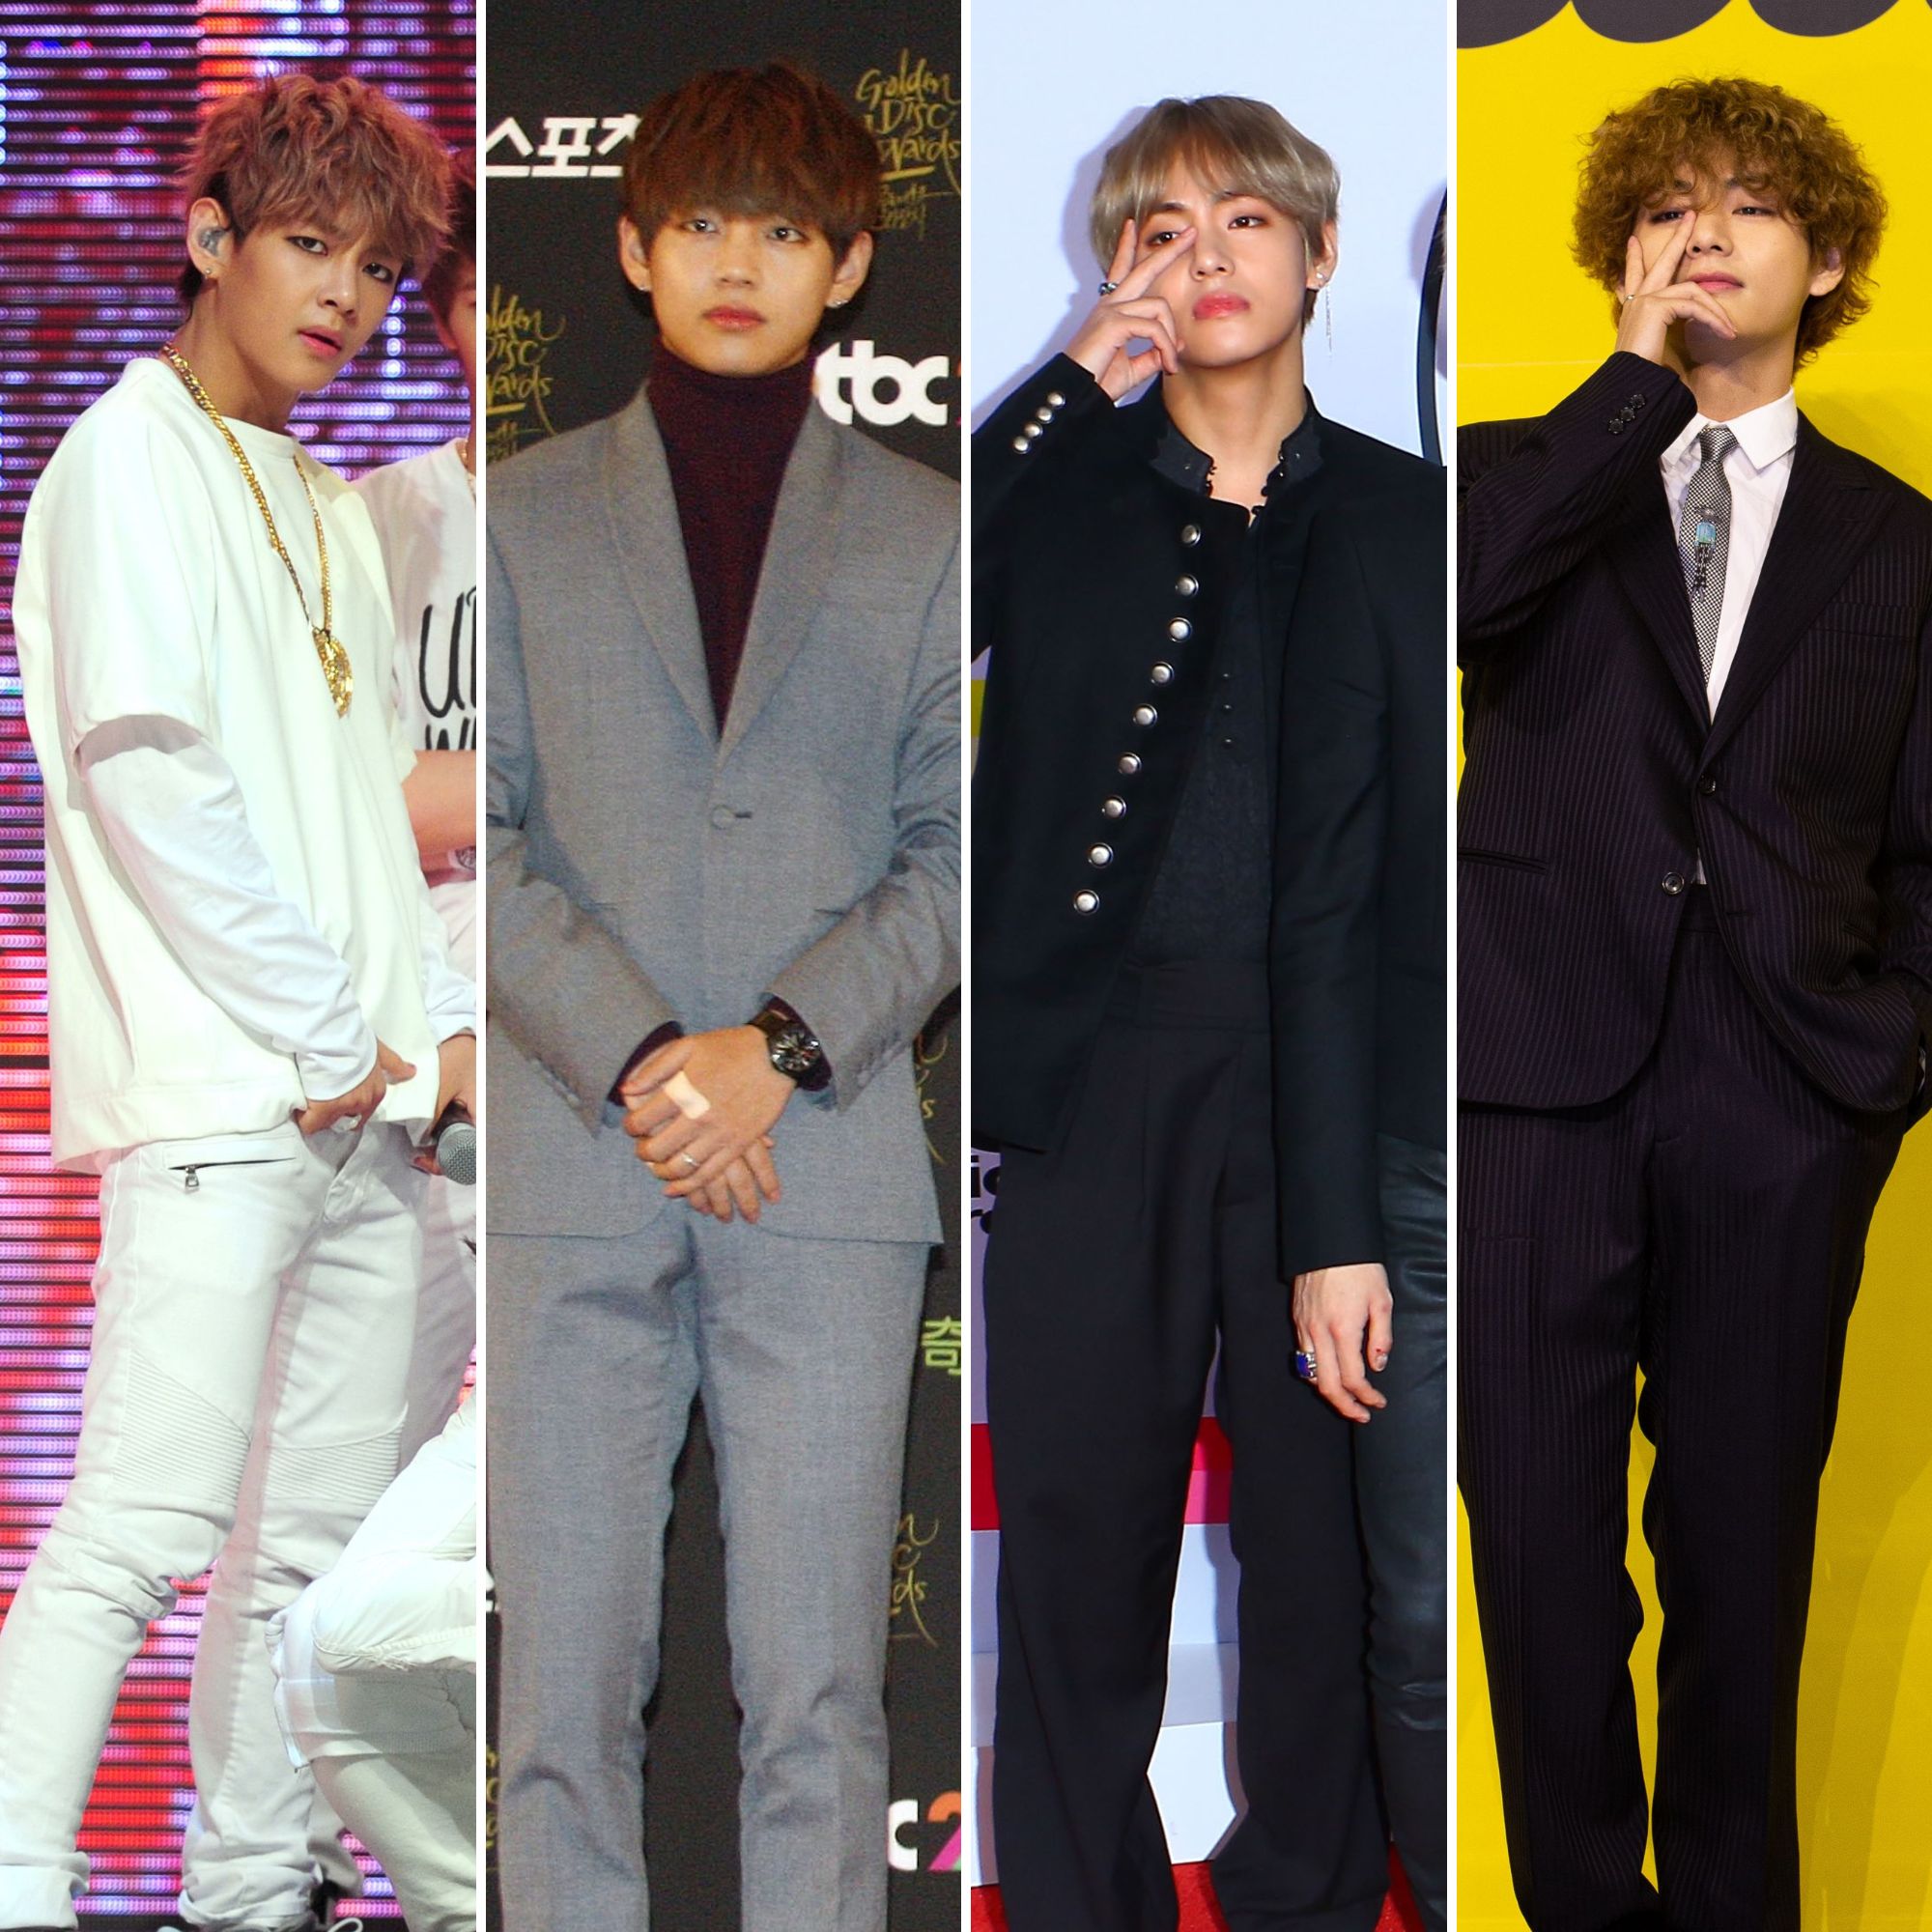 Merch designed by BTS's V already in high demand before release